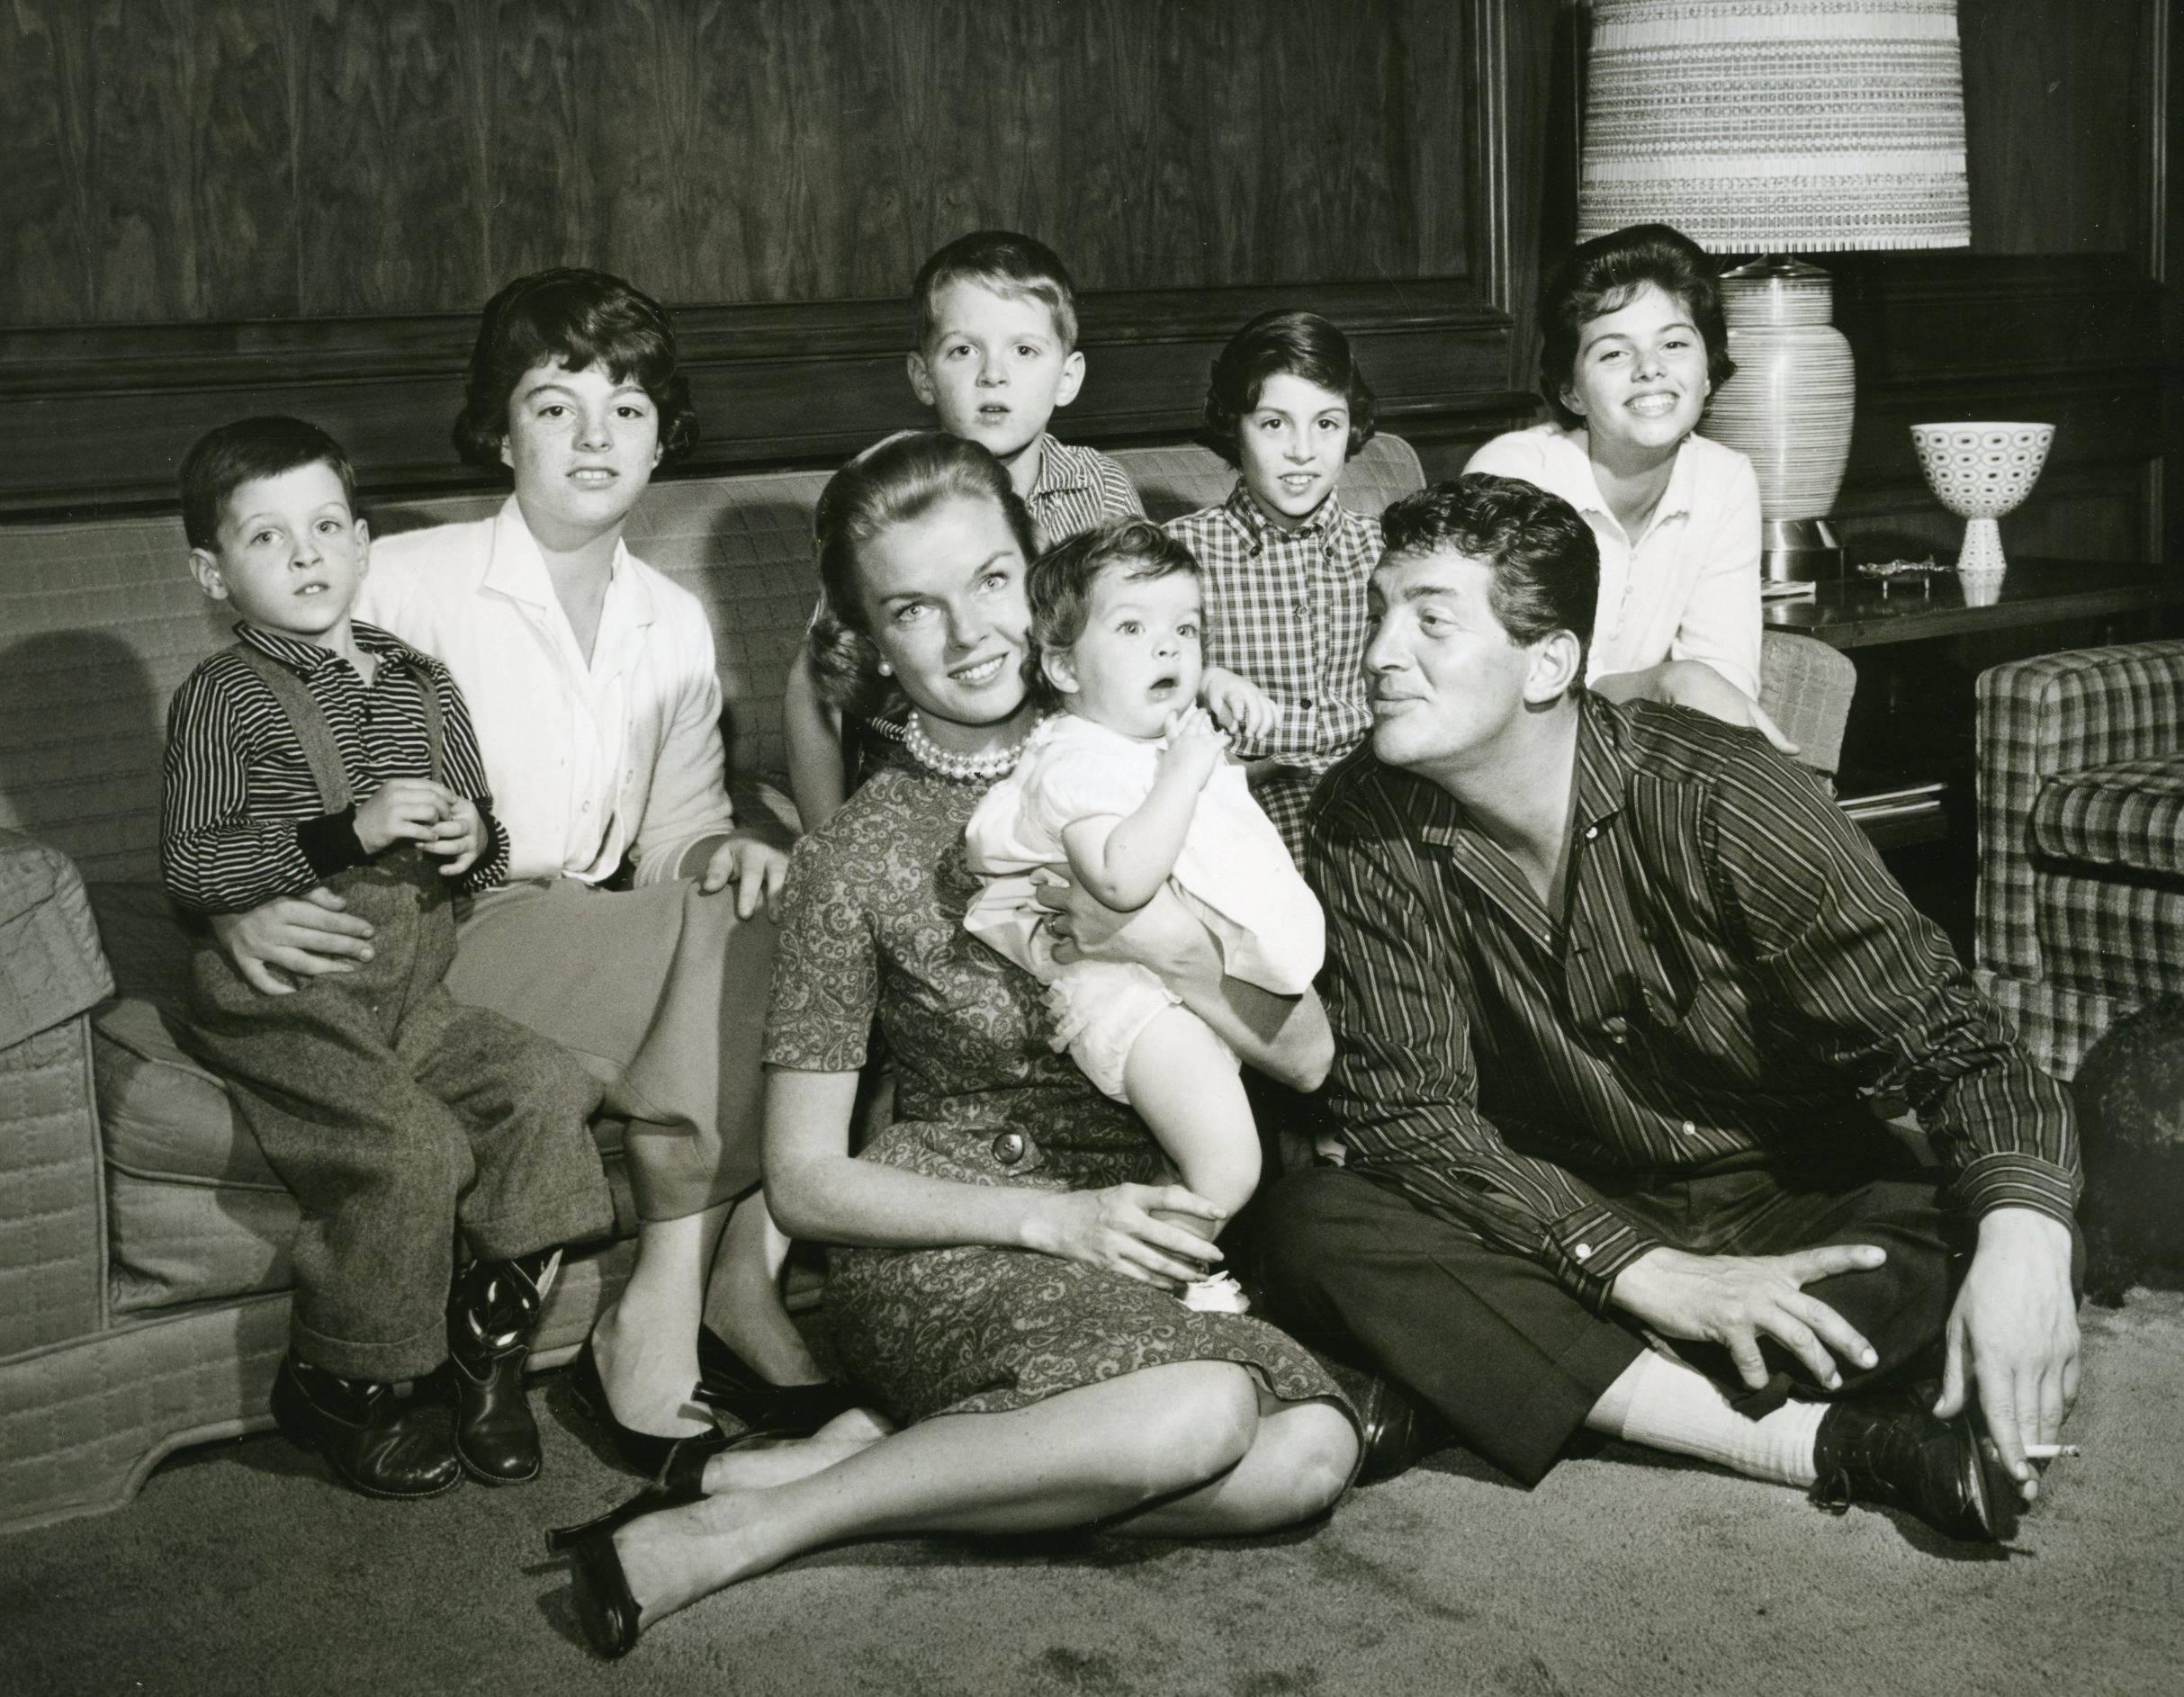 Unknown Black and White Photograph - Original Vintage Photograph of Dean Martin at home with his family